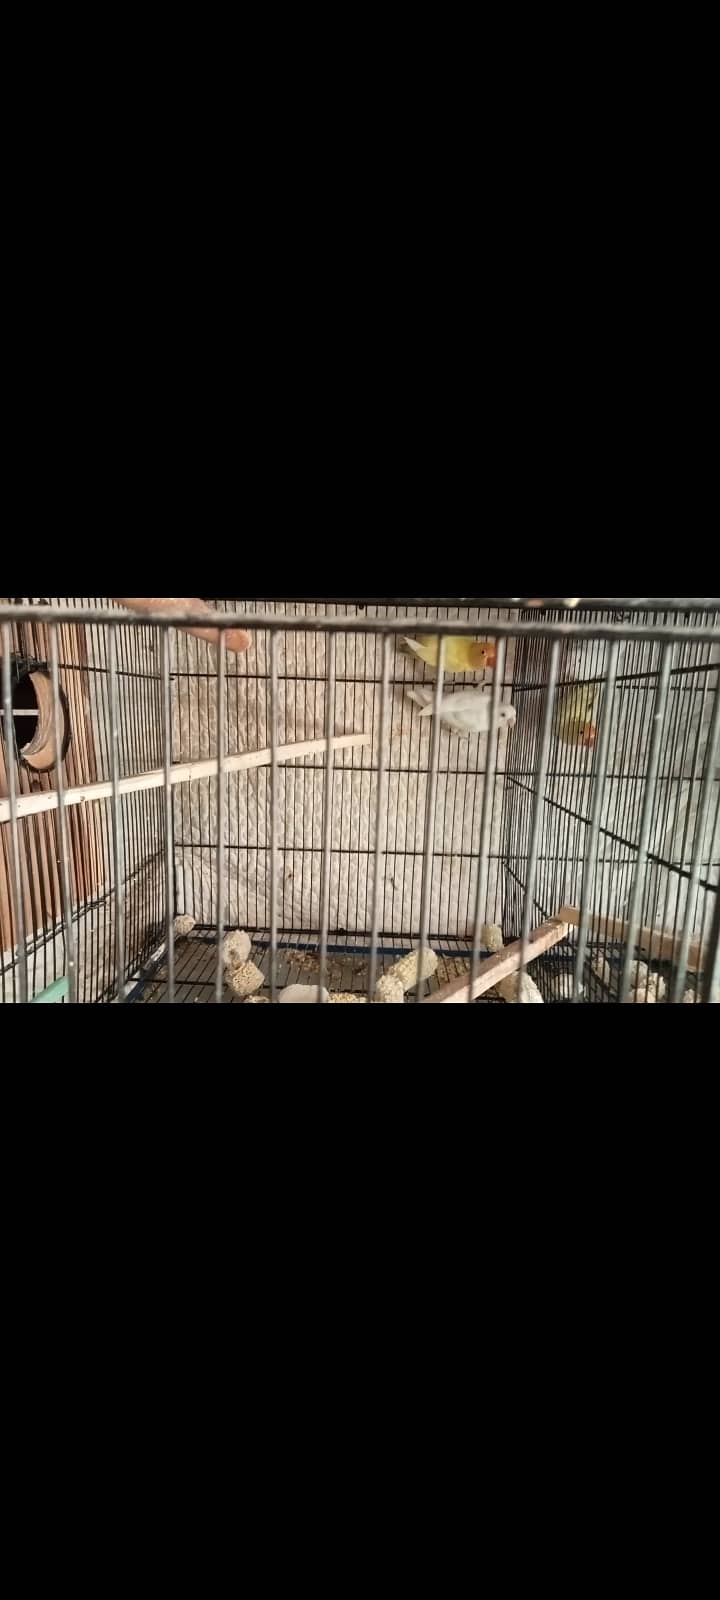 Lutino Pairs+Chic , Albino, Parblue, Splits, Adults, home breed Chicks 4